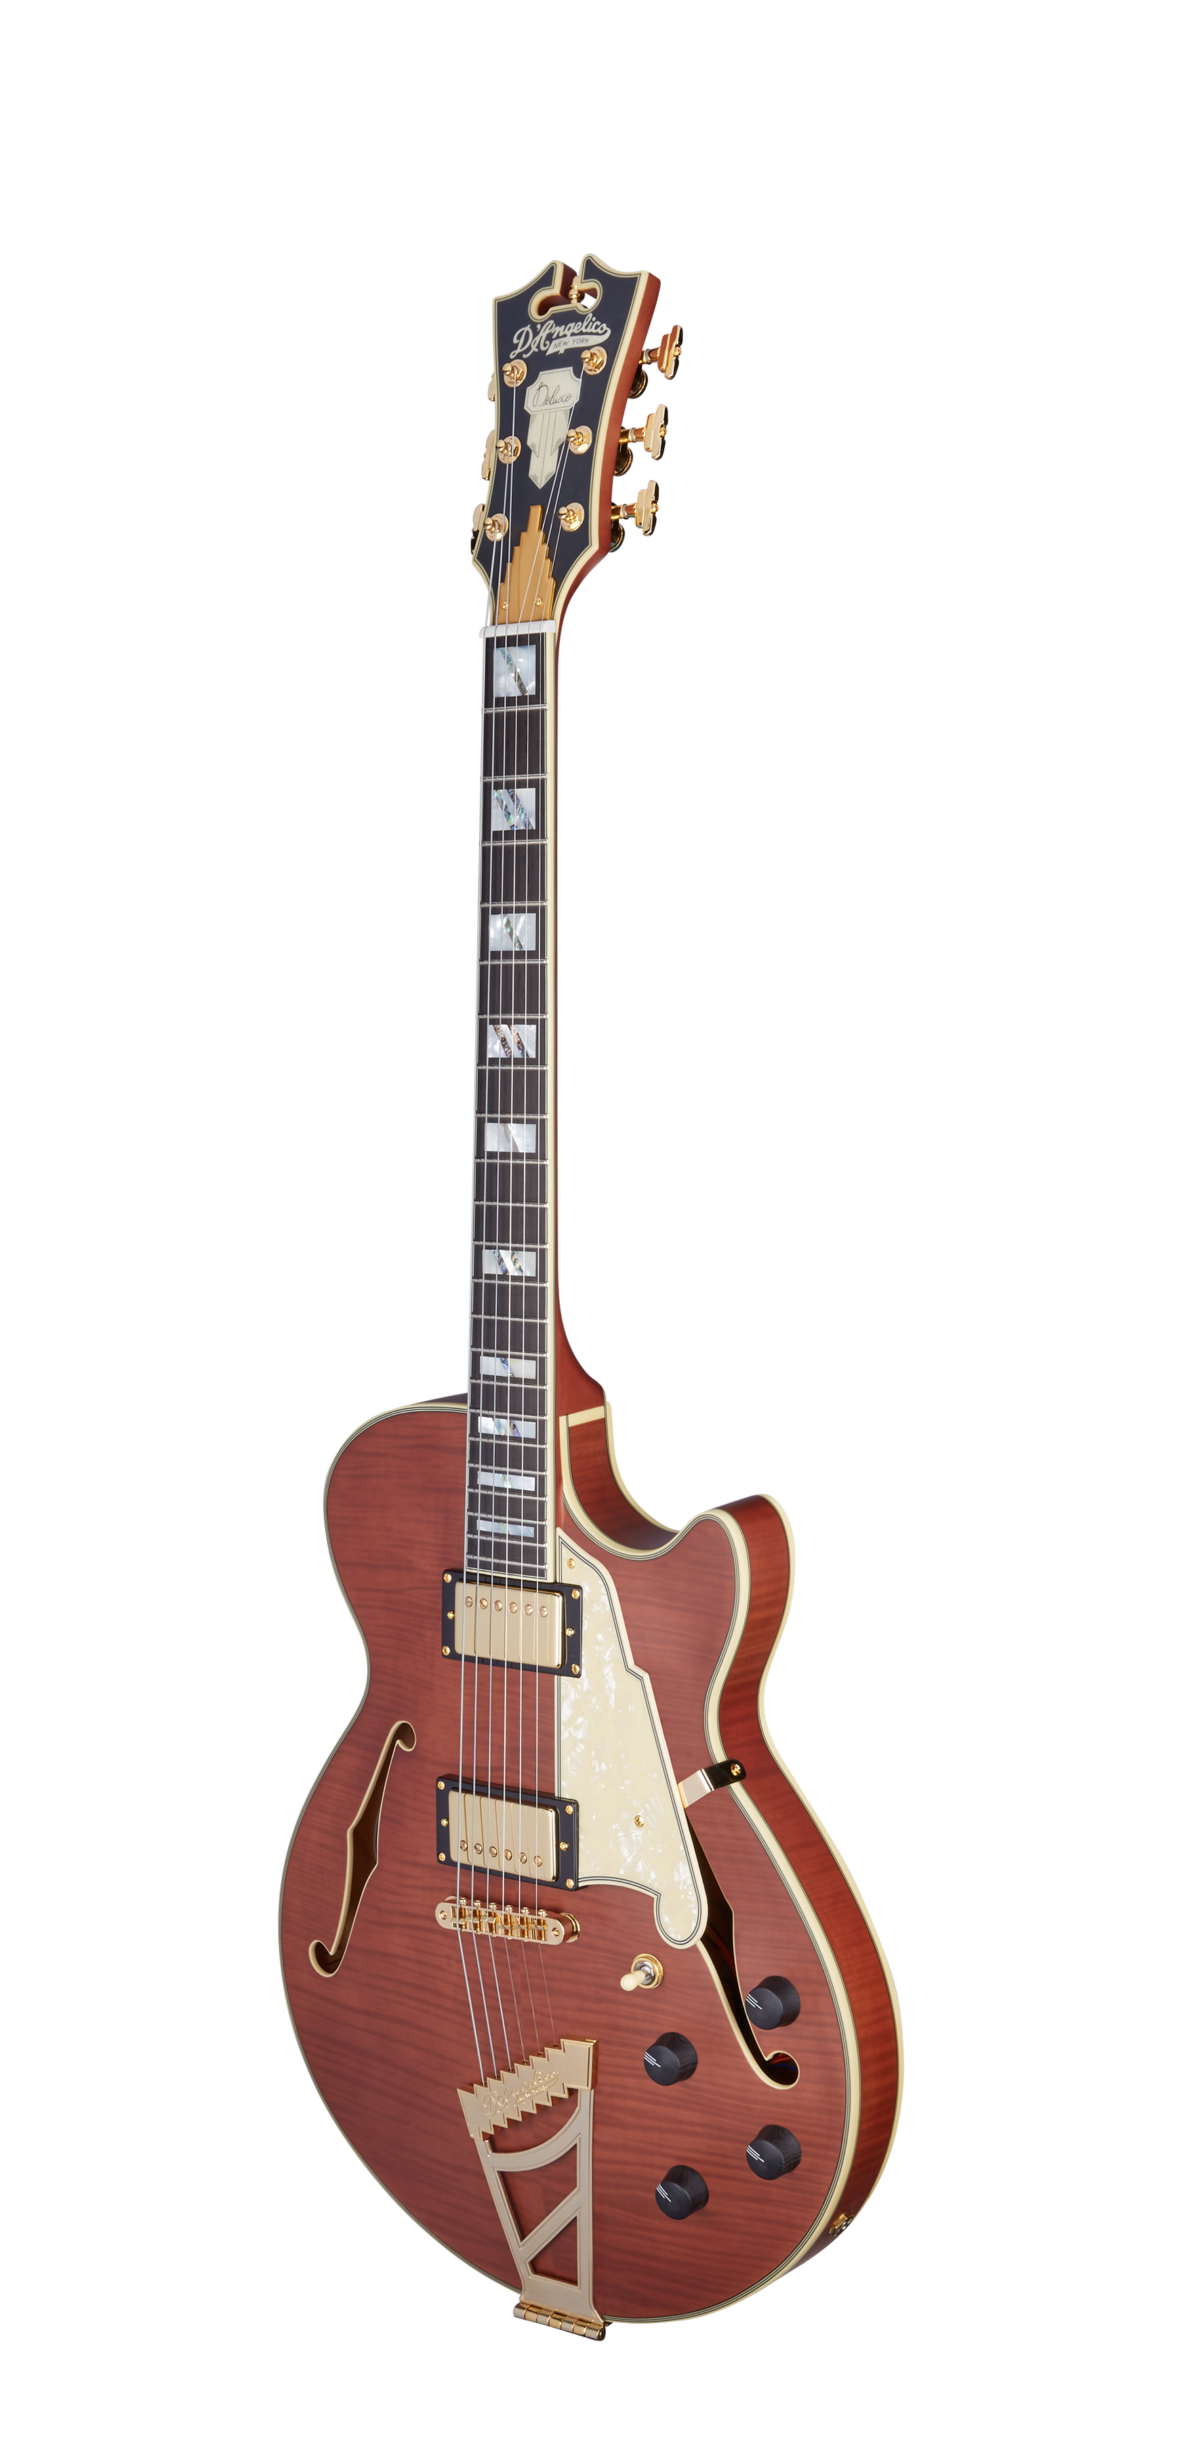 Deluxe SS LE (Discontinued) - D'Angelico Guitars